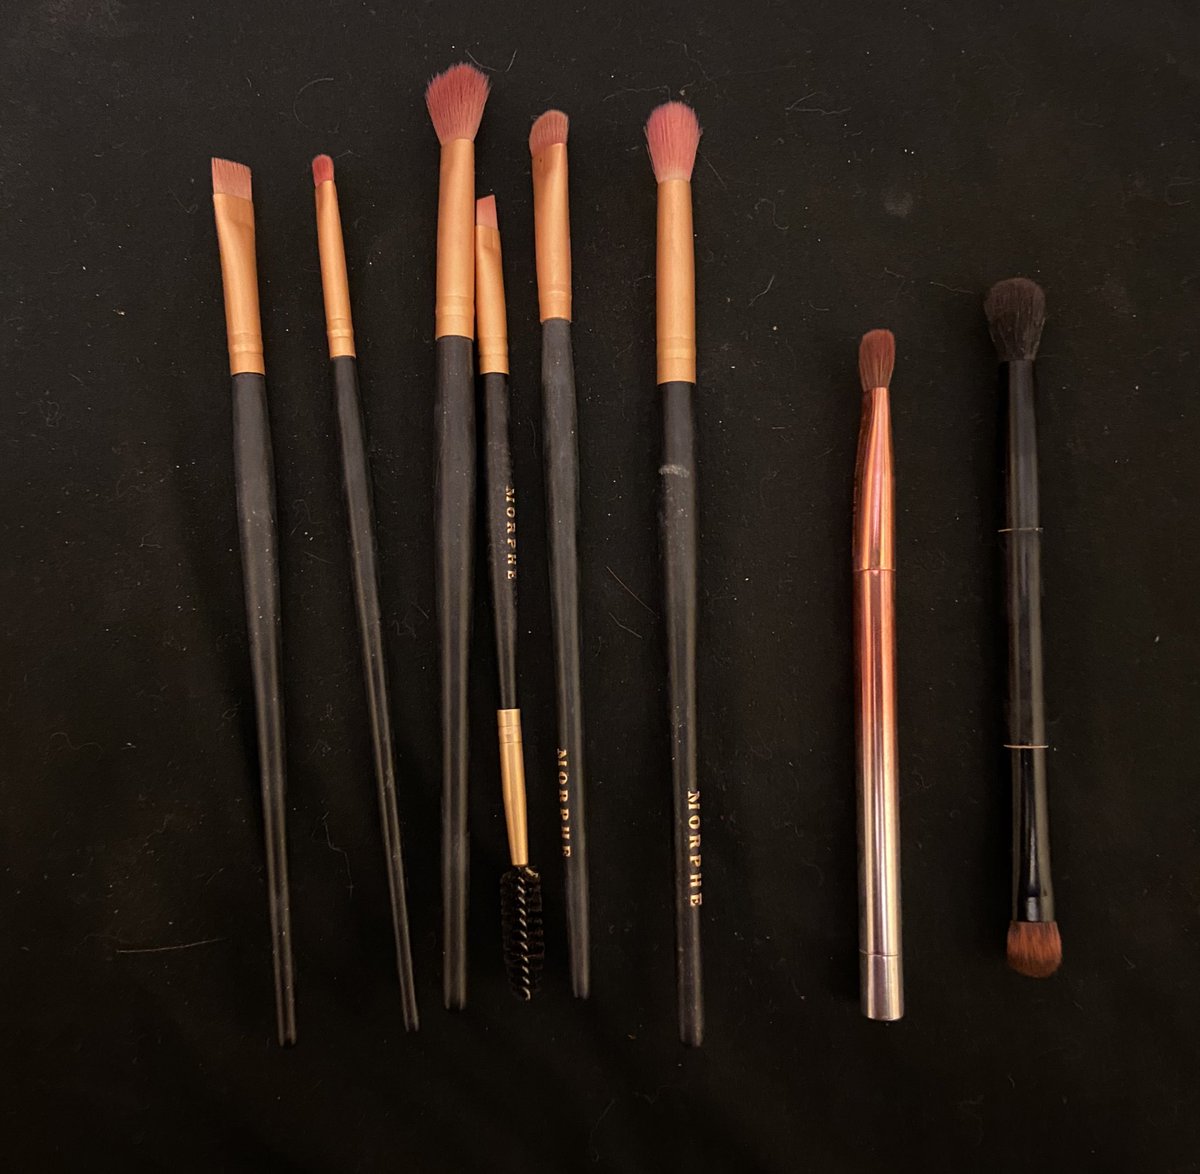 {brushes}pic 1: morphe face that beat face brush collectionpic 2, left to right: morphe all eye want eye brush collection, sephora beauty magnet eye brush, and an abh brush i got with a palette 